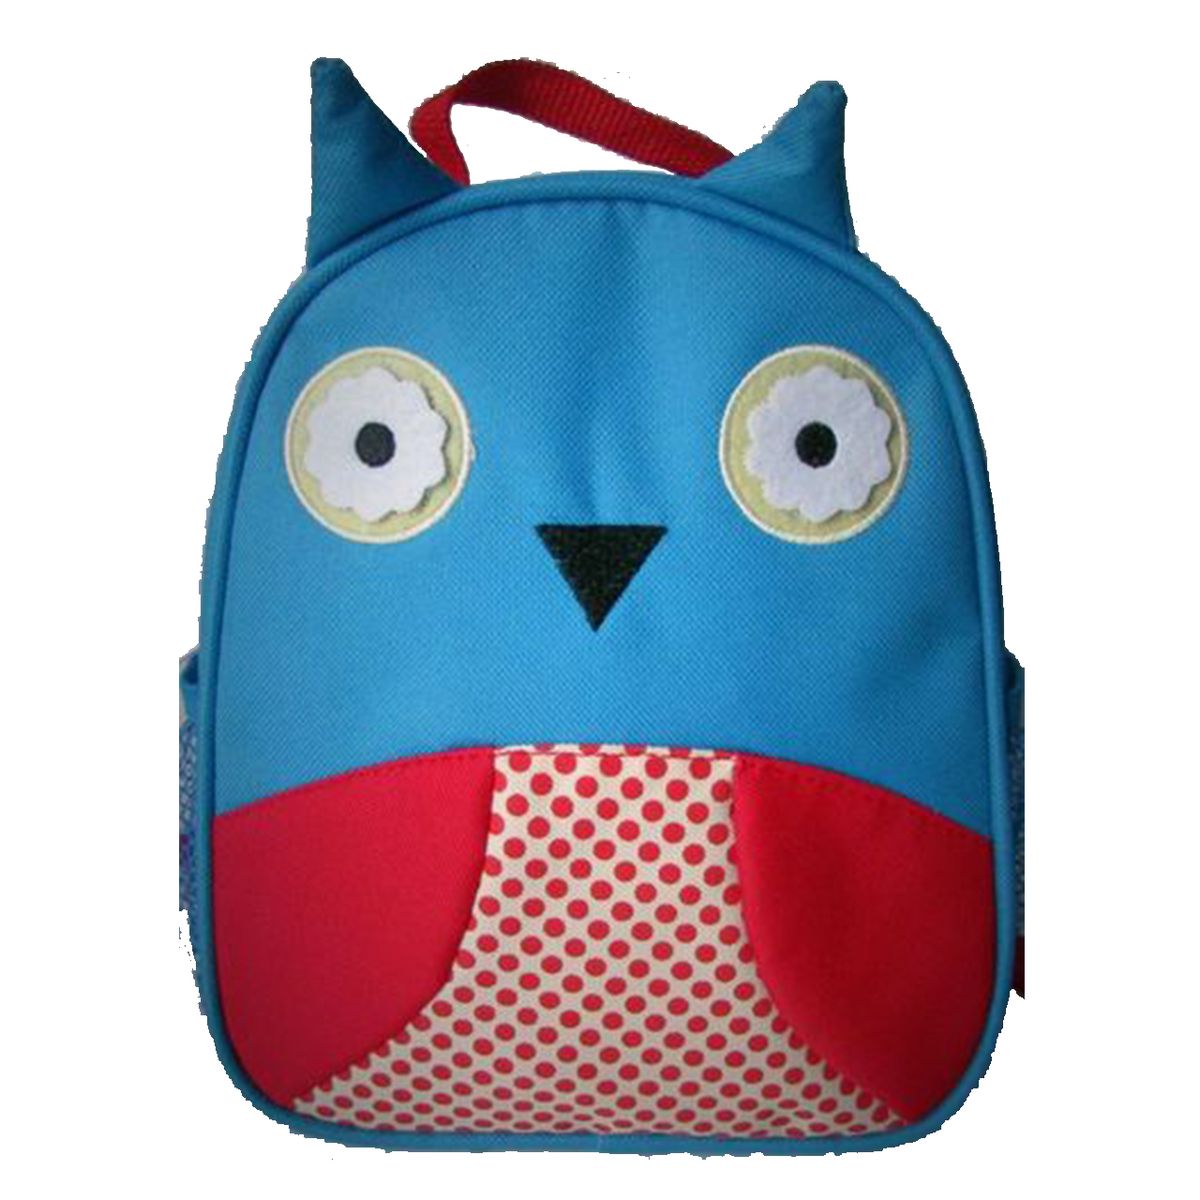 Snuggletime Toddler Character Backpack - Owl | Shop Today. Get it ...